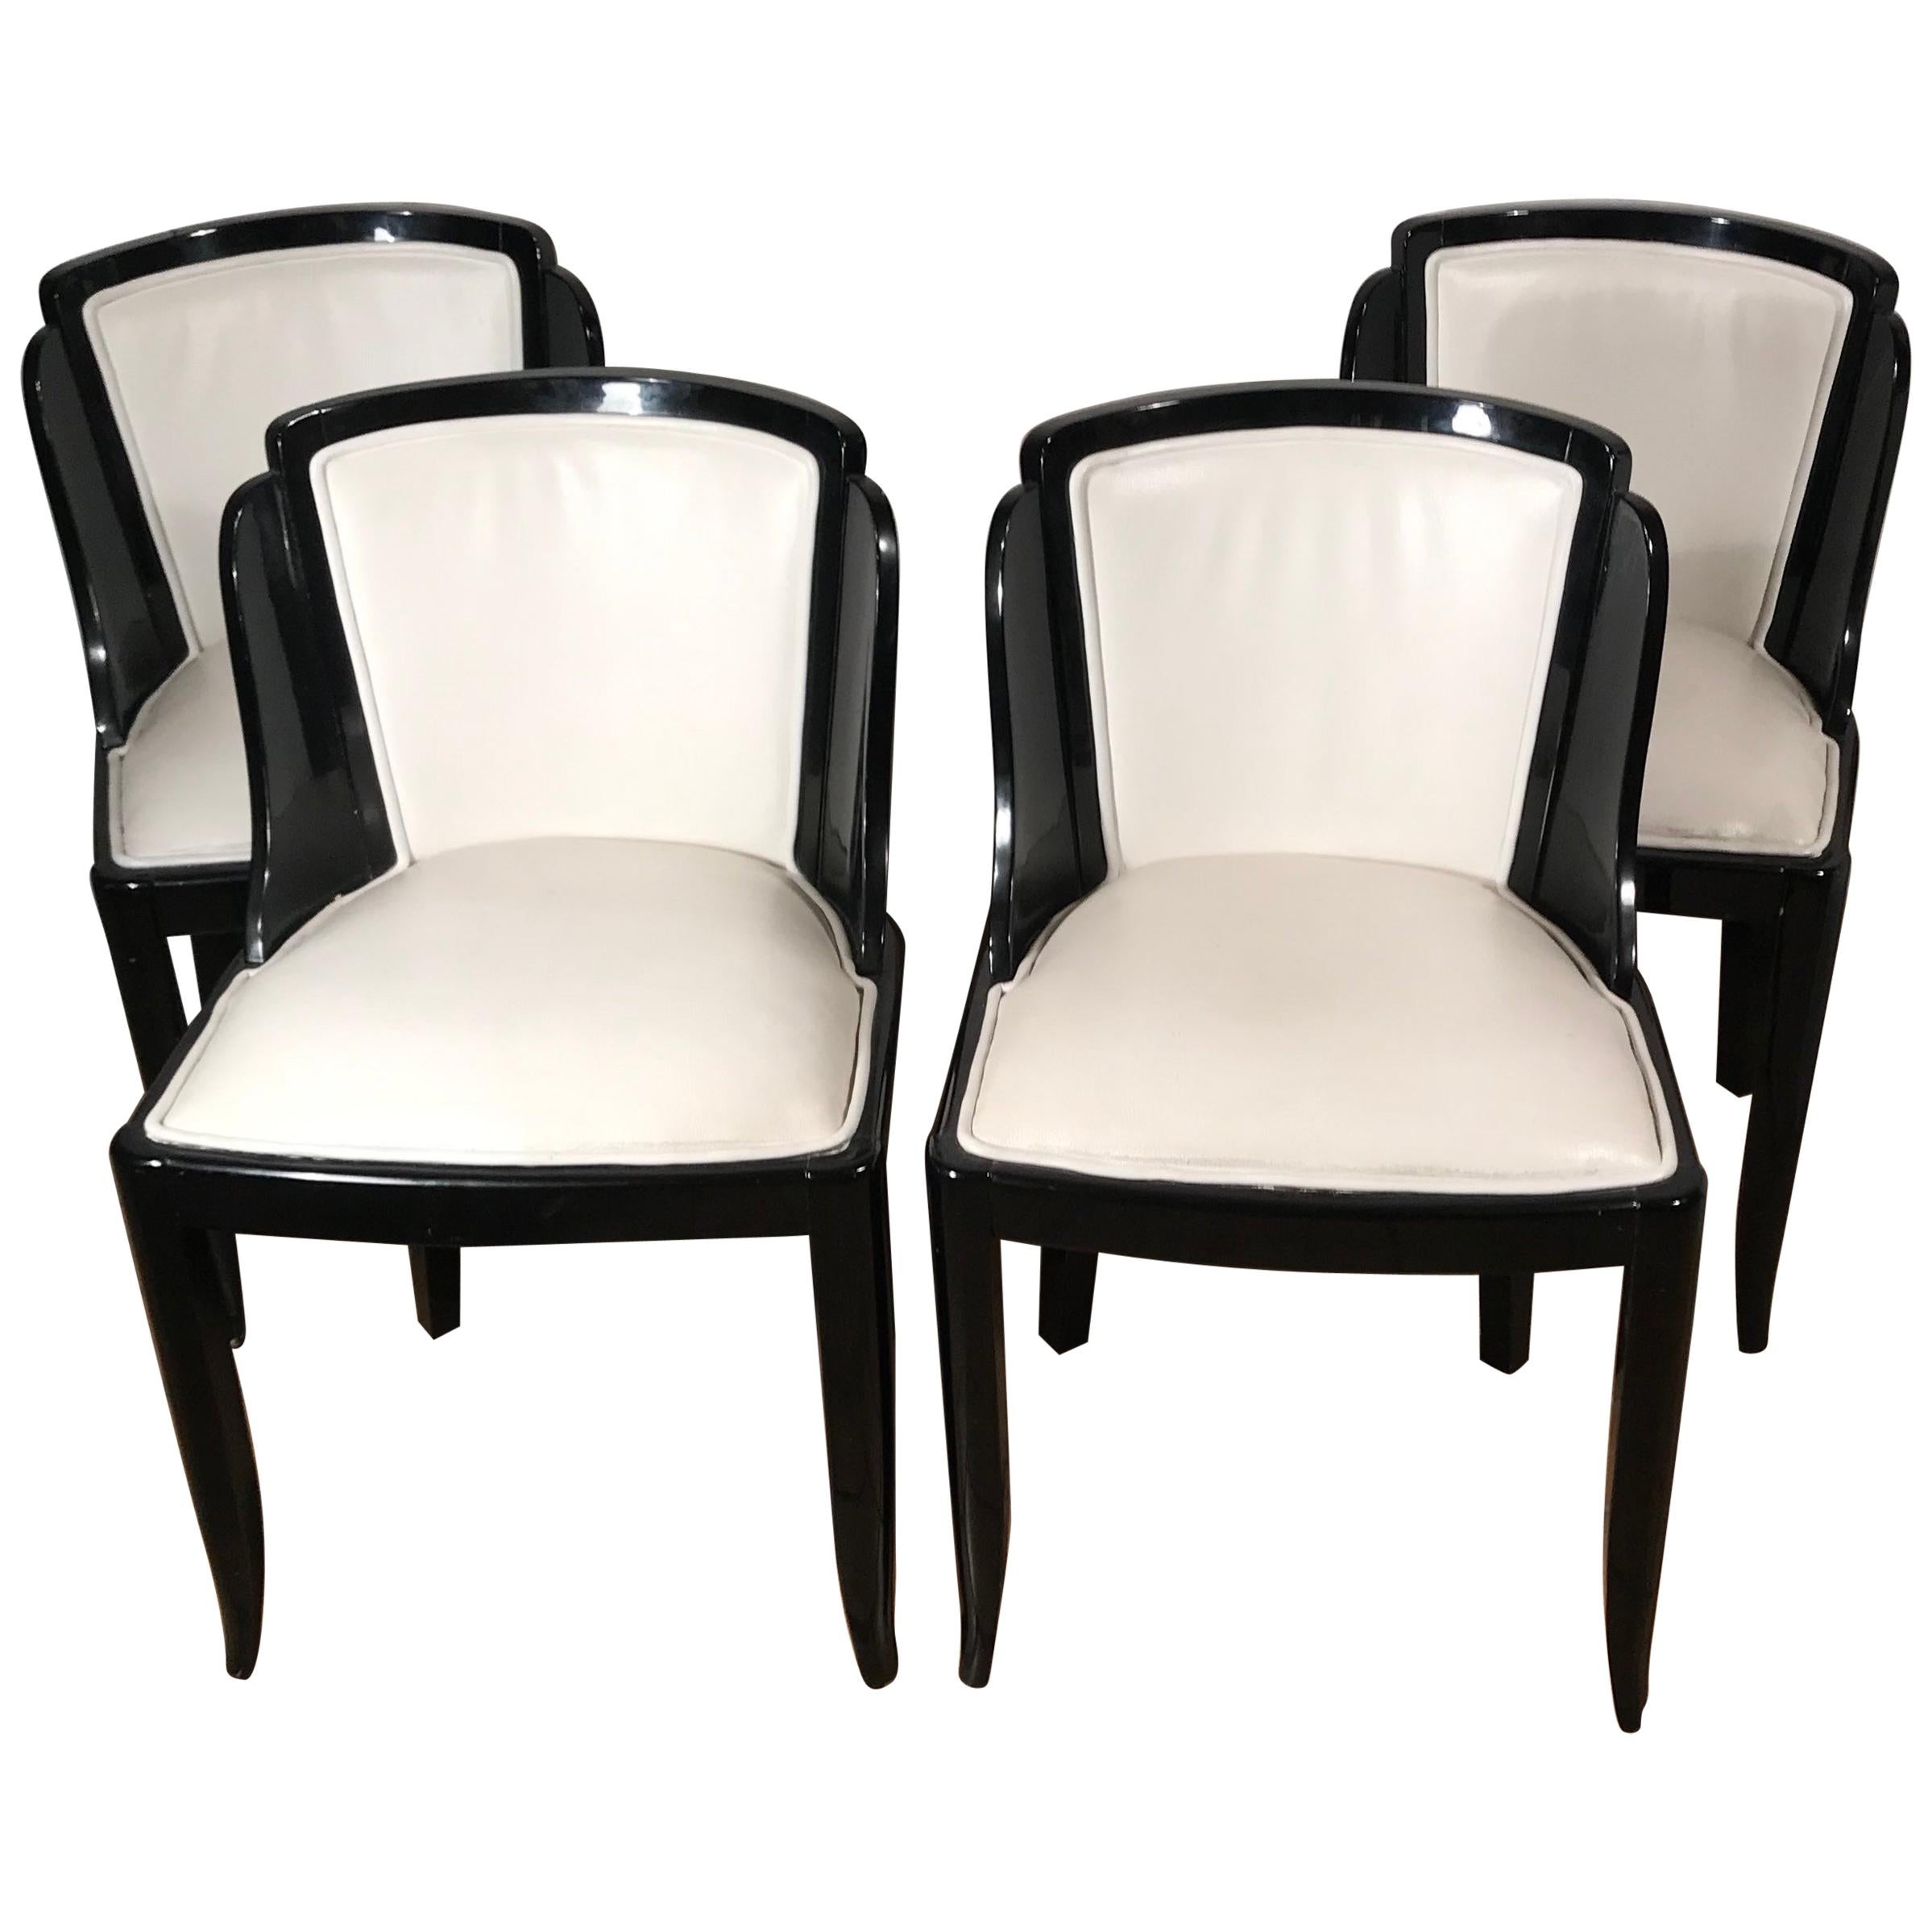 Set of Four Art Deco Chairs, France 20th century, Wood with Black Lacquer Finish